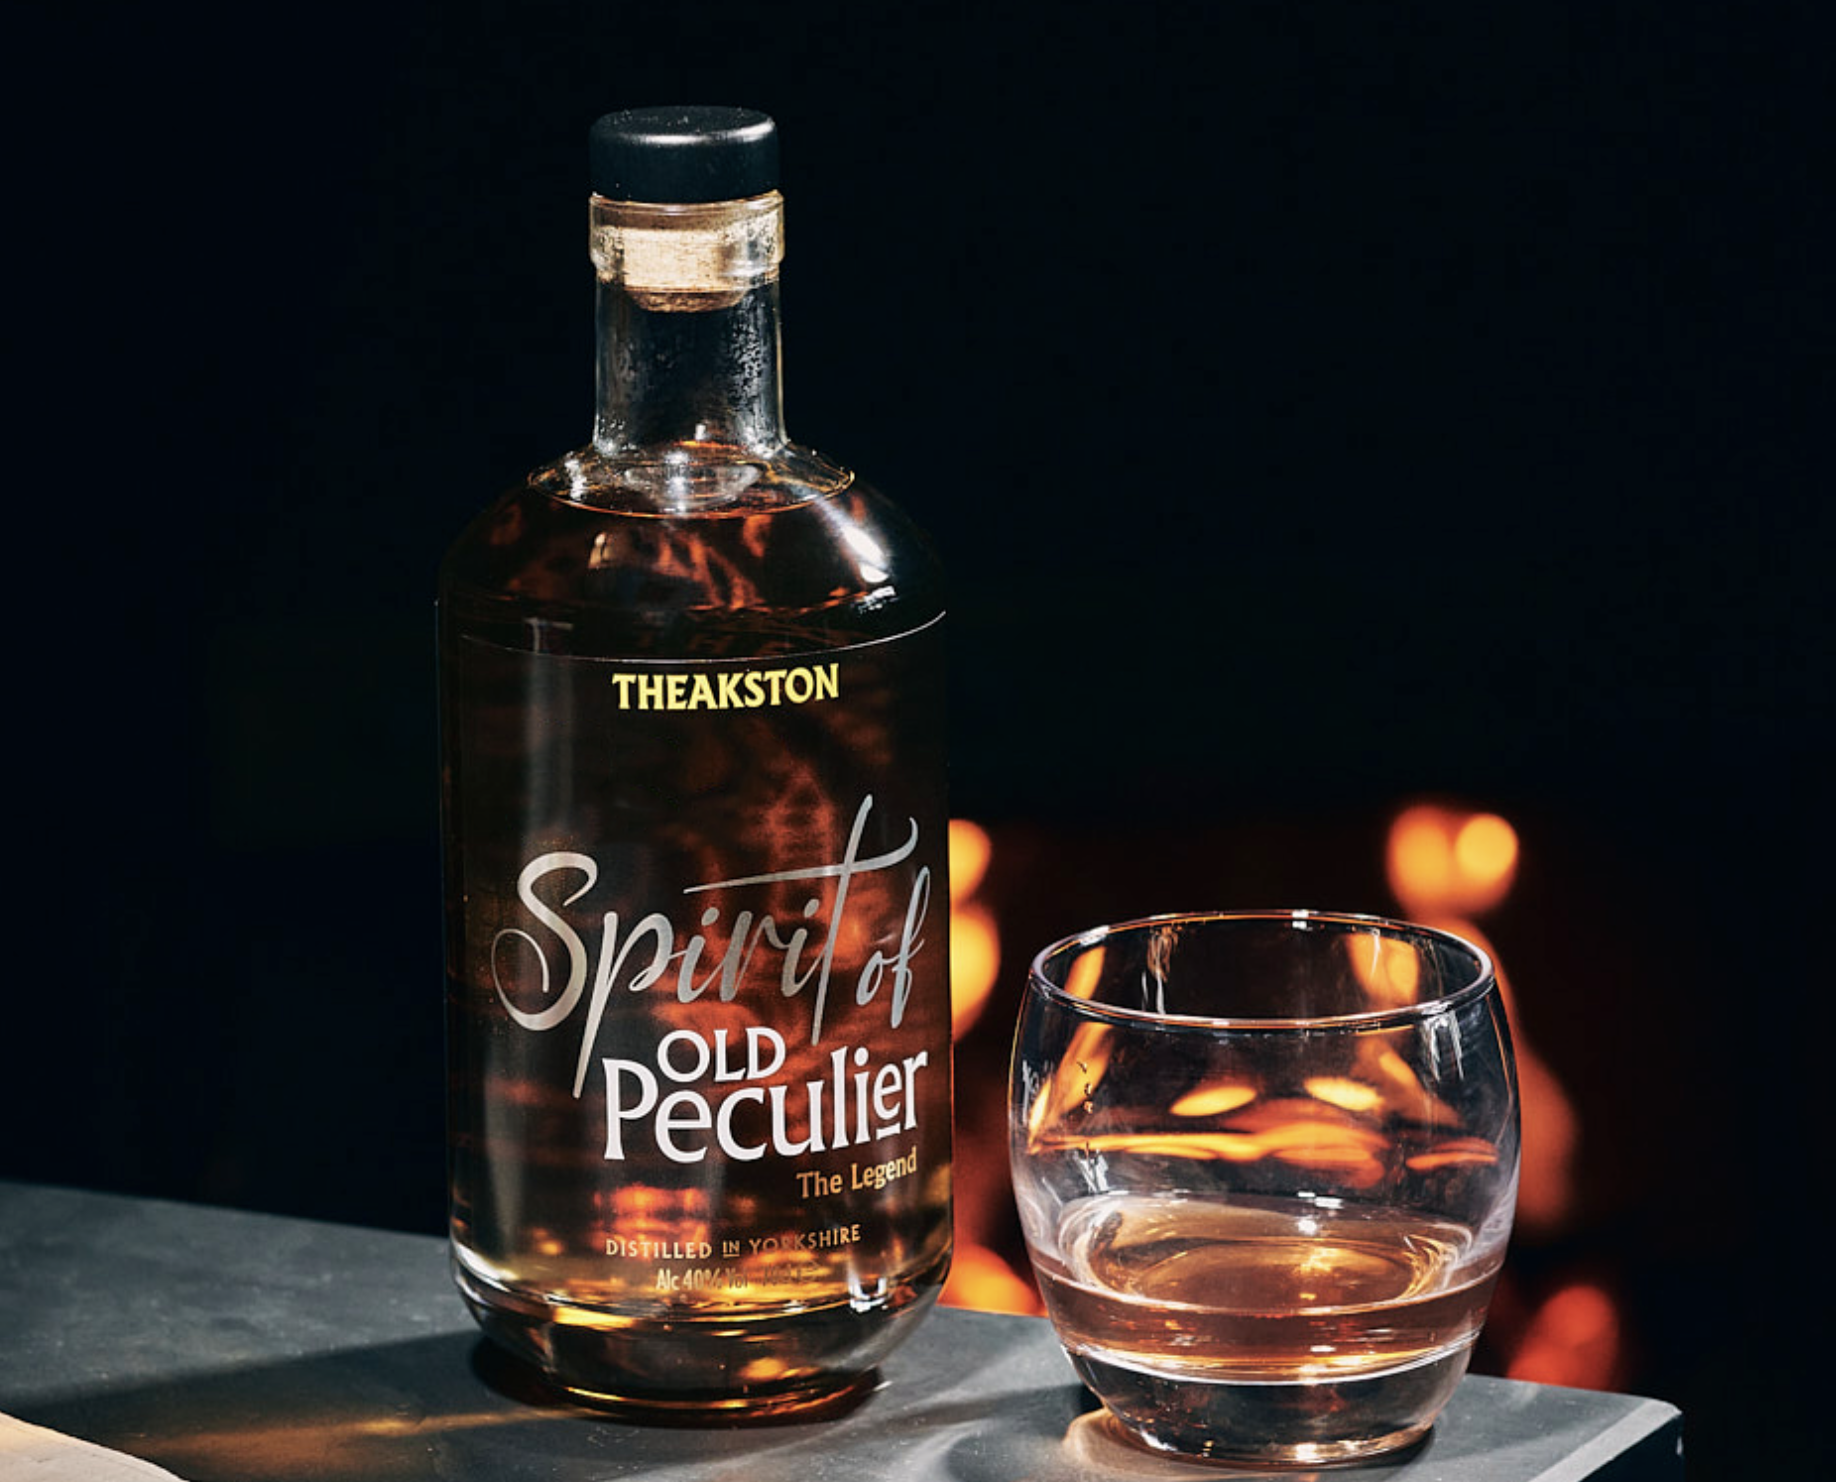 Theakston launches Old Peculier ‘Beer Spirit’